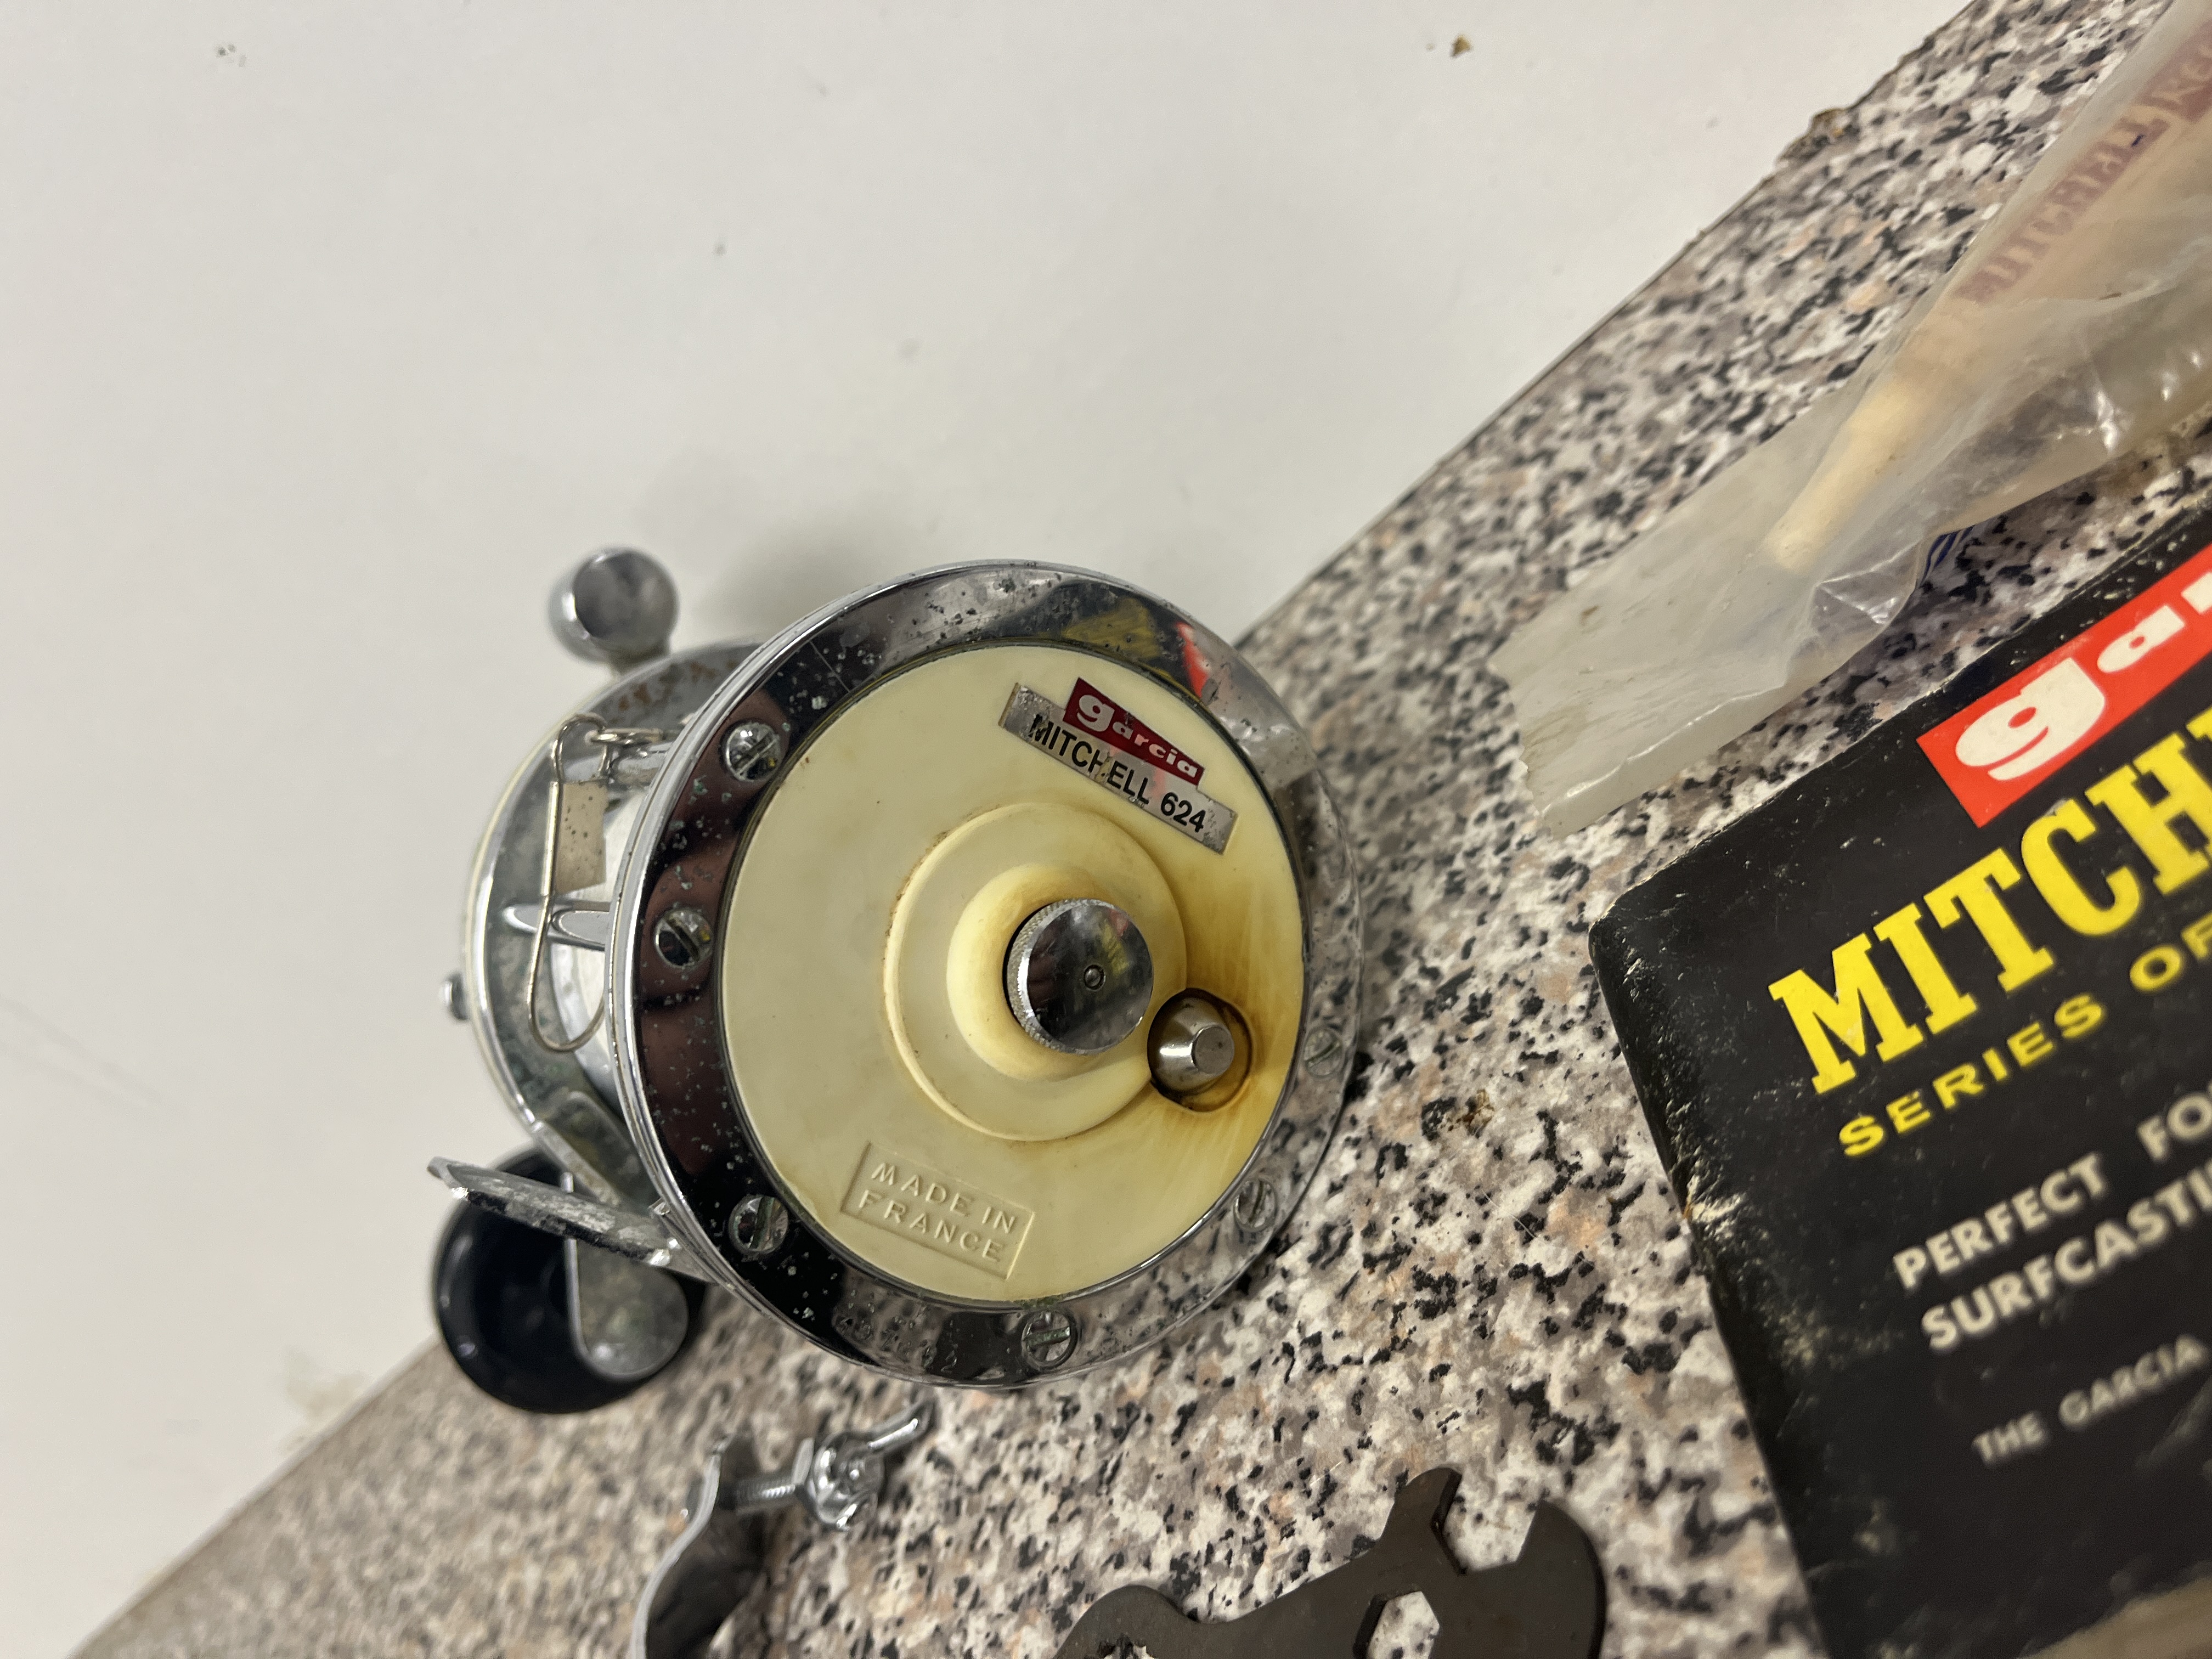 Garcia Mitchell 624 multiplier early 1970s fishing reel etc - Image 2 of 5